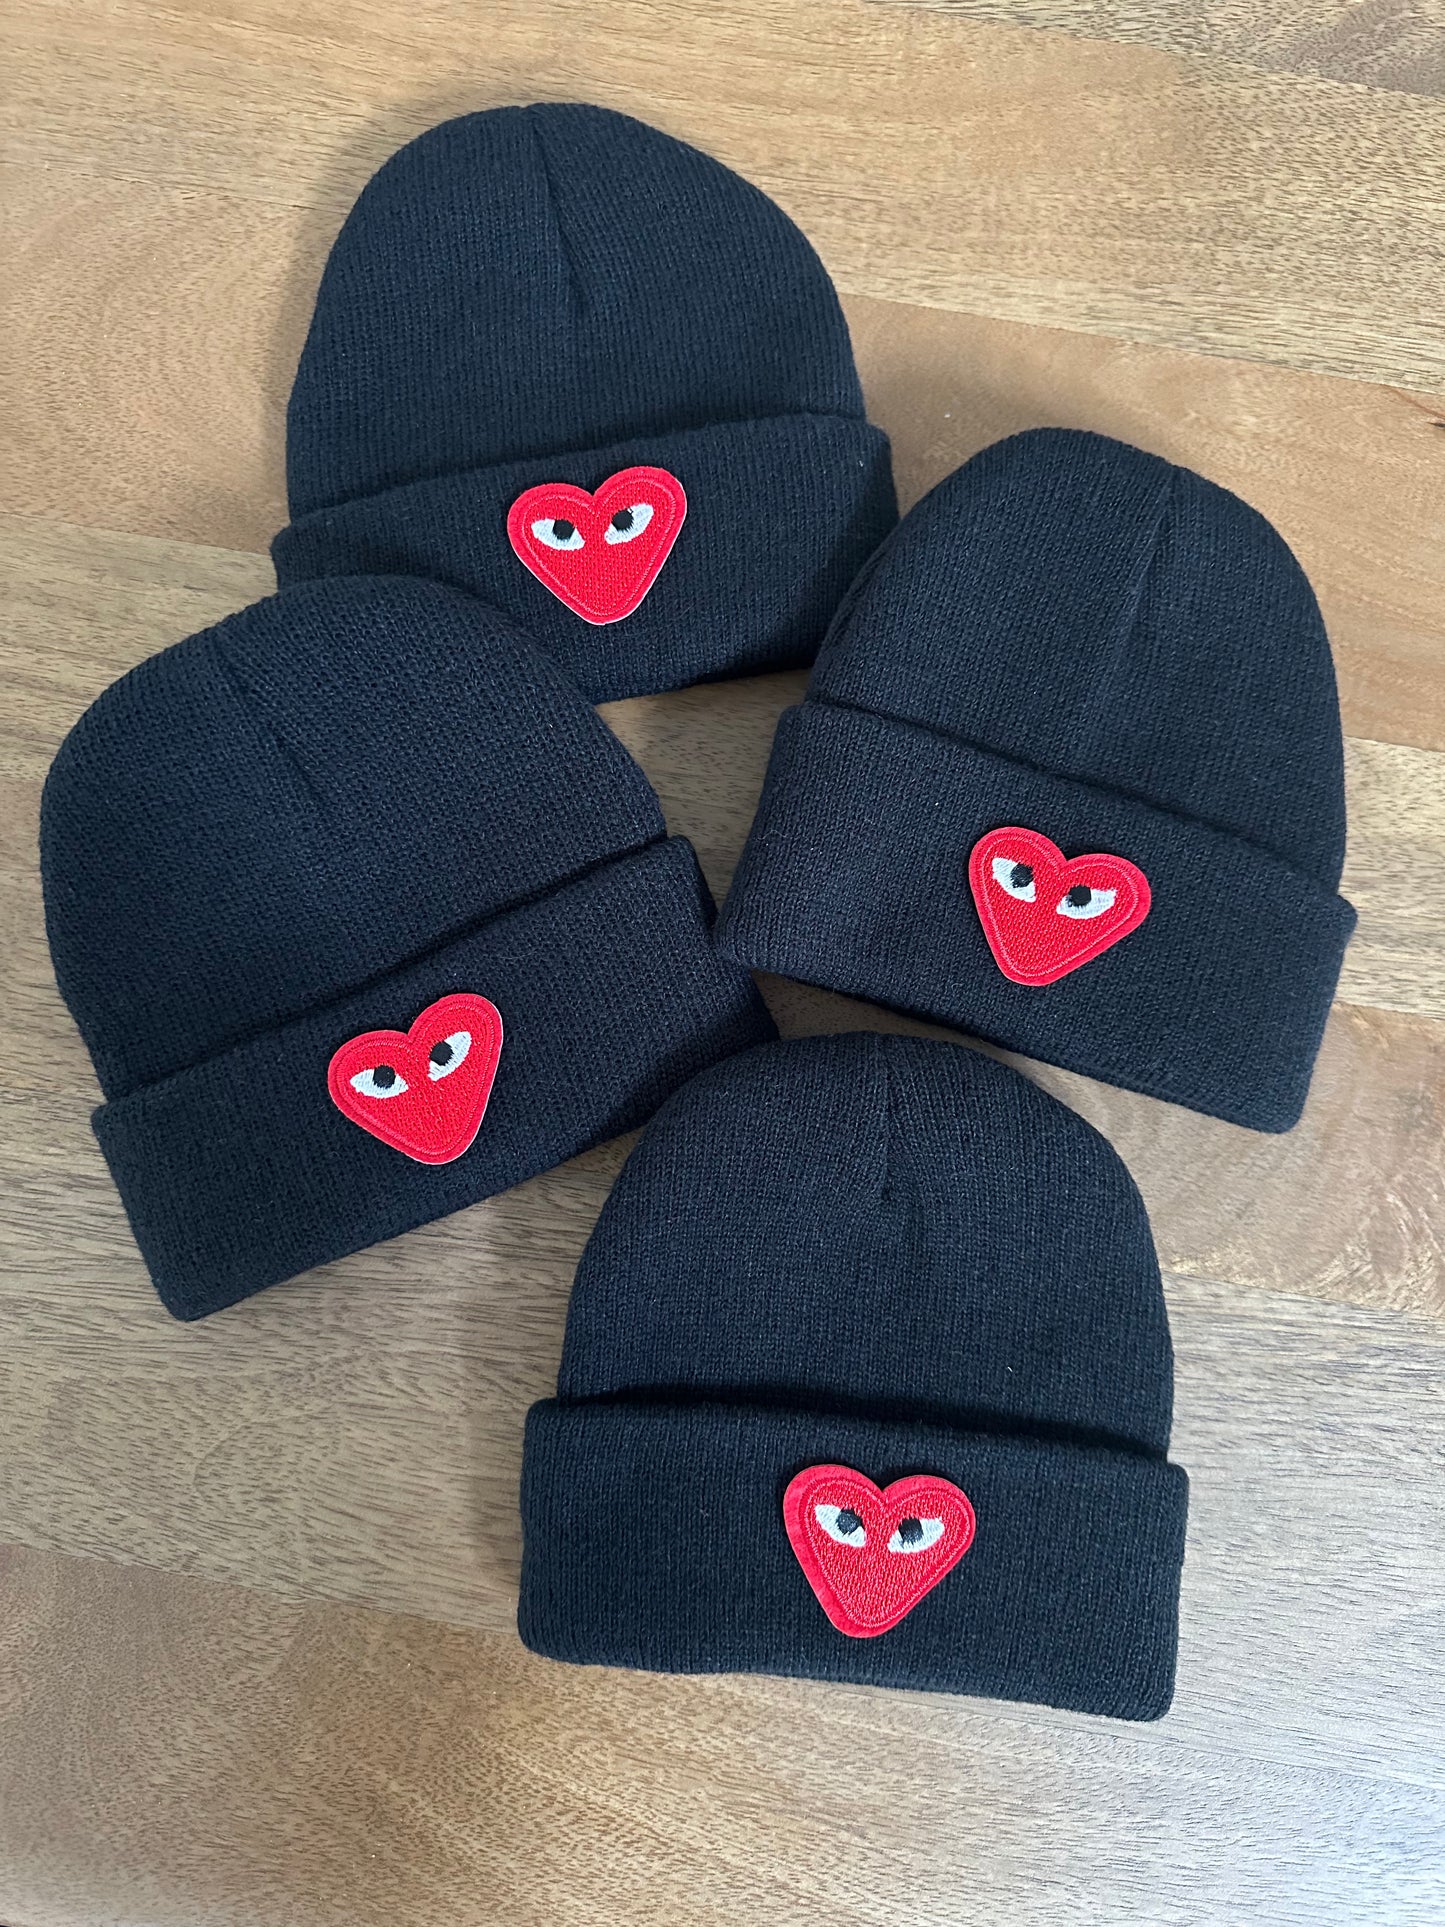 Load image into Gallery viewer, BABY PATCH BEANIE ♡ baby beanie with red heart patch
